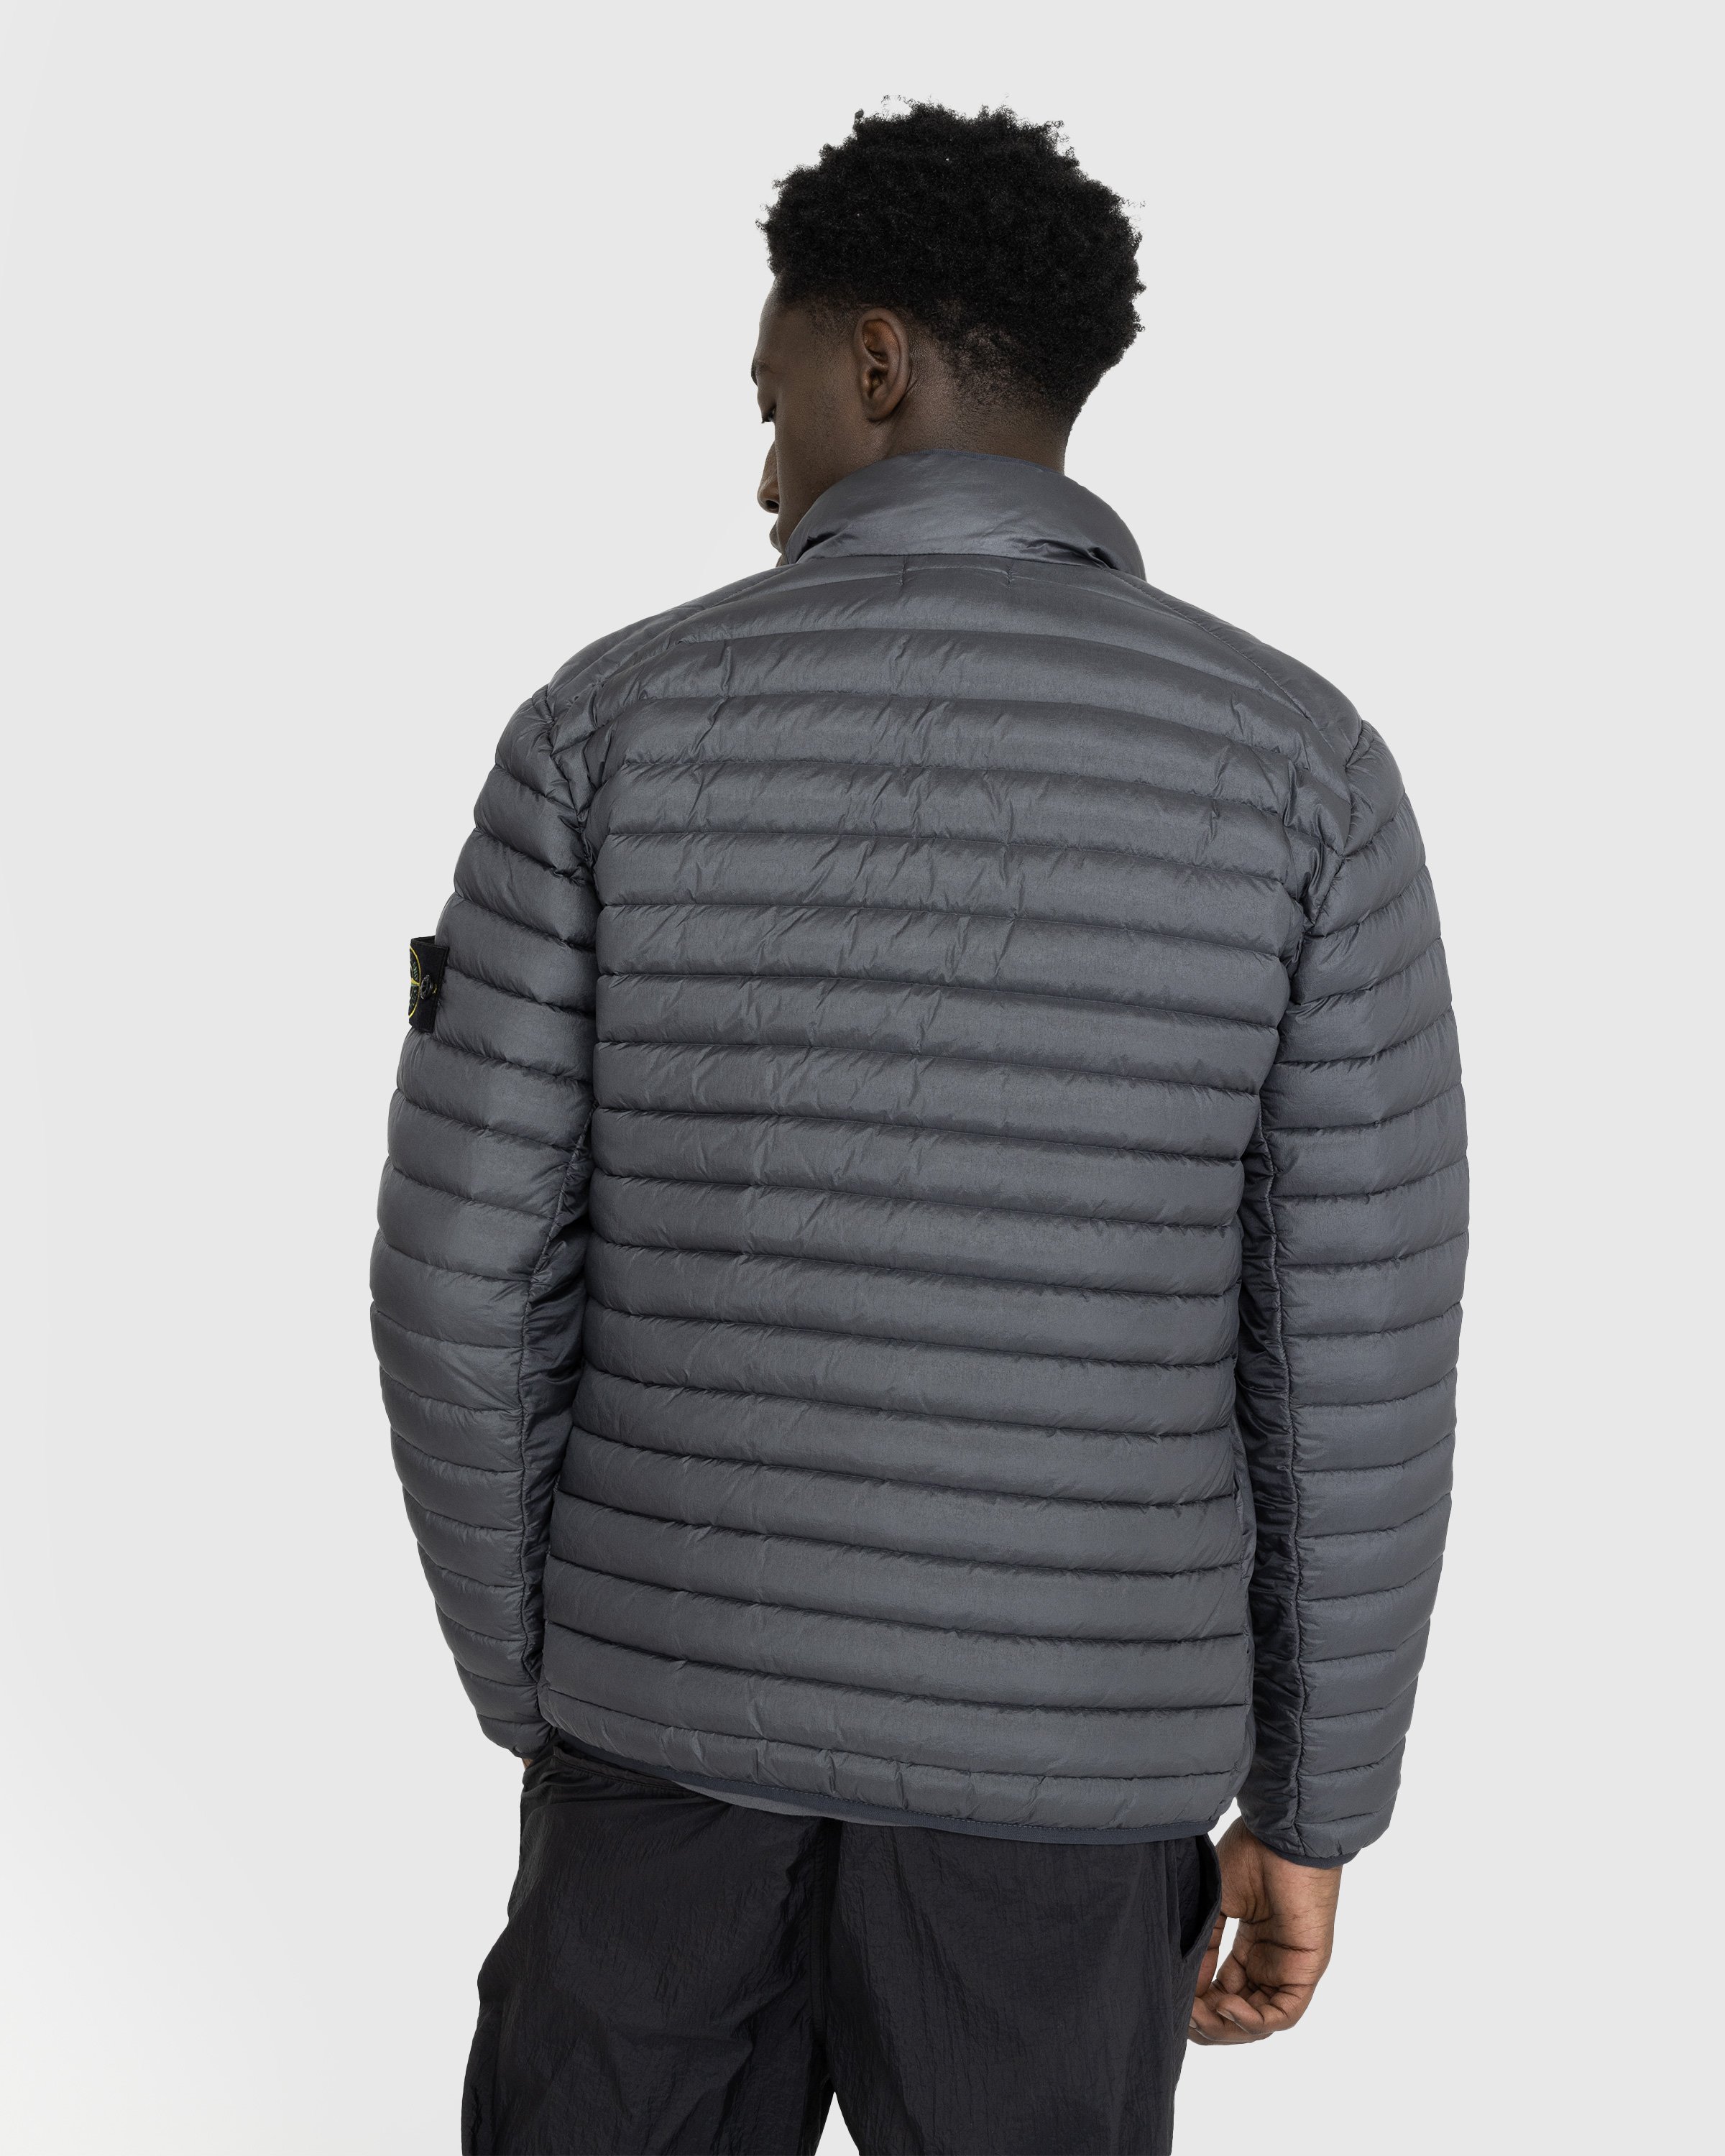 Stone Island - Packable Recycled Nylon Down Jacket Lead Grey - Clothing - Grey - Image 3